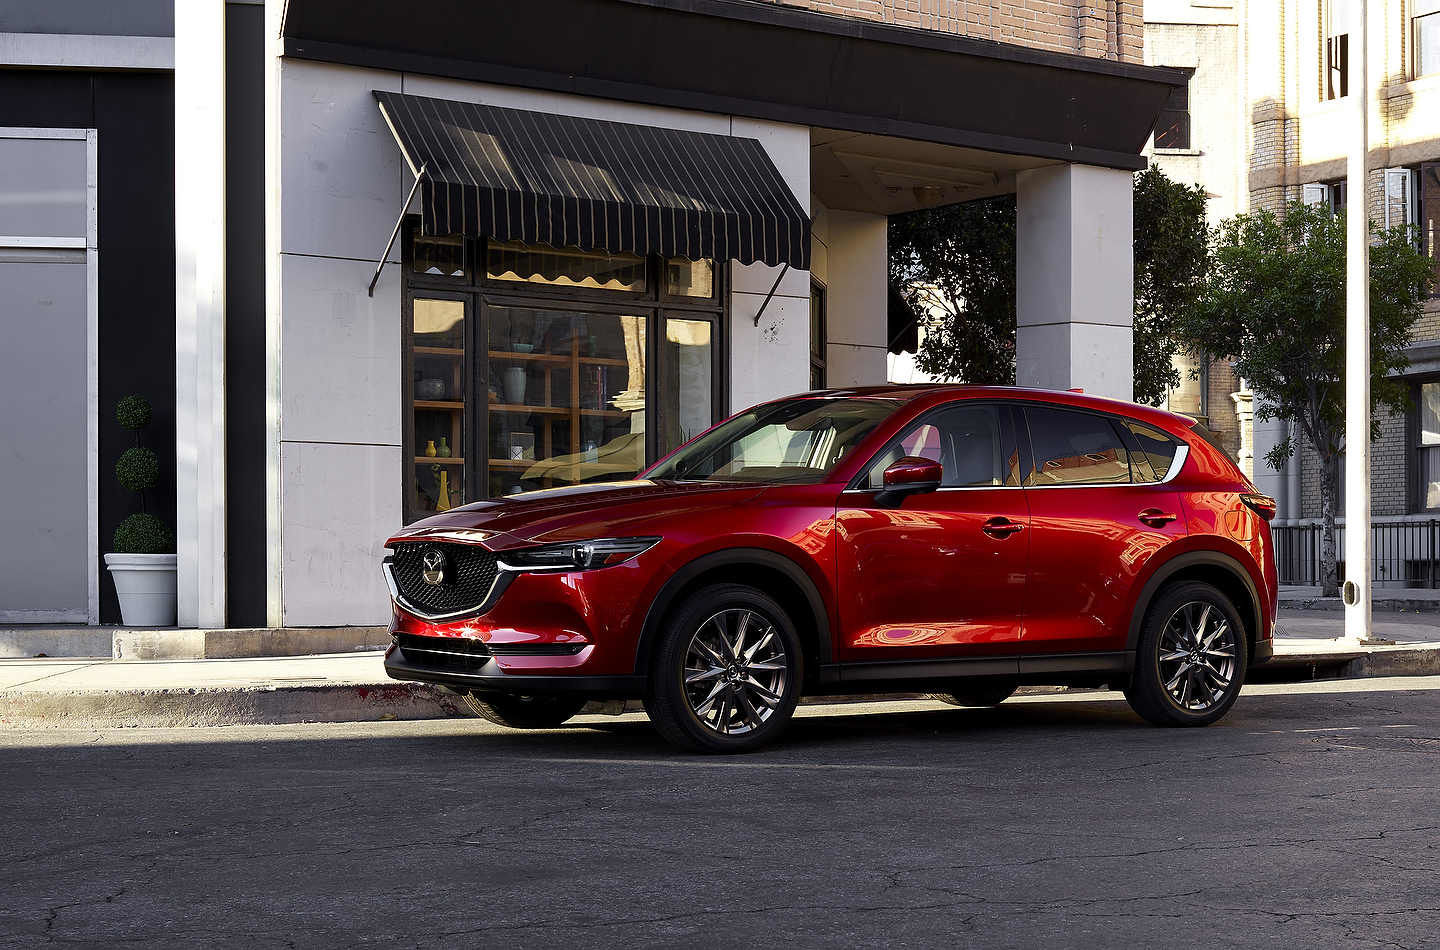 Should You Consider a Pre-Owned Mazda CX-5?